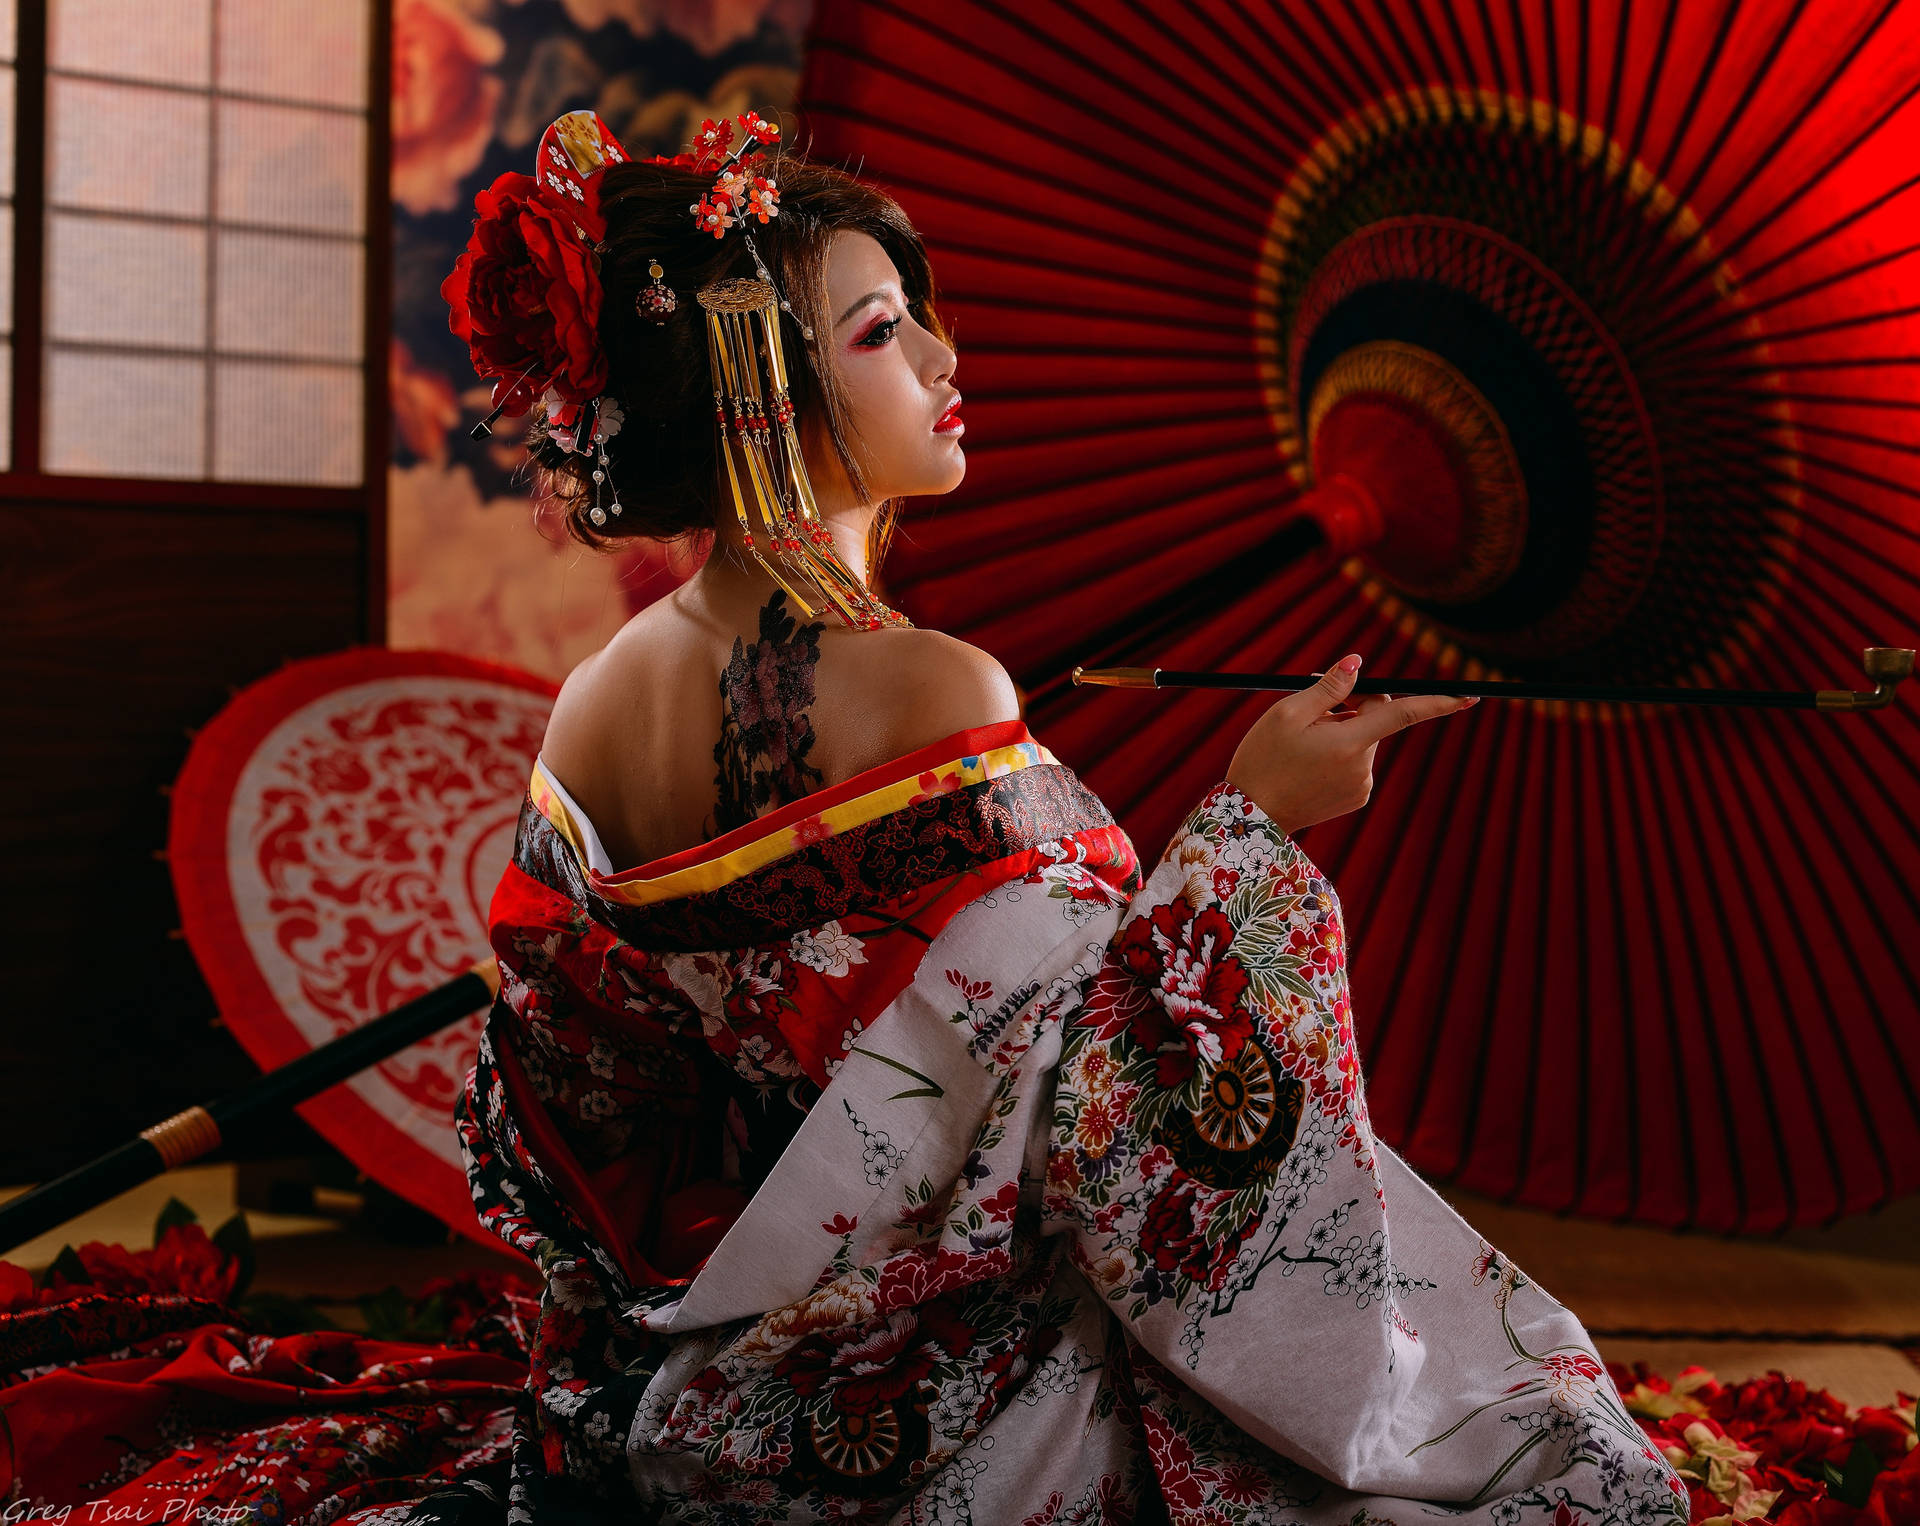 Japanese Girl With Red Parasol Wallpaper